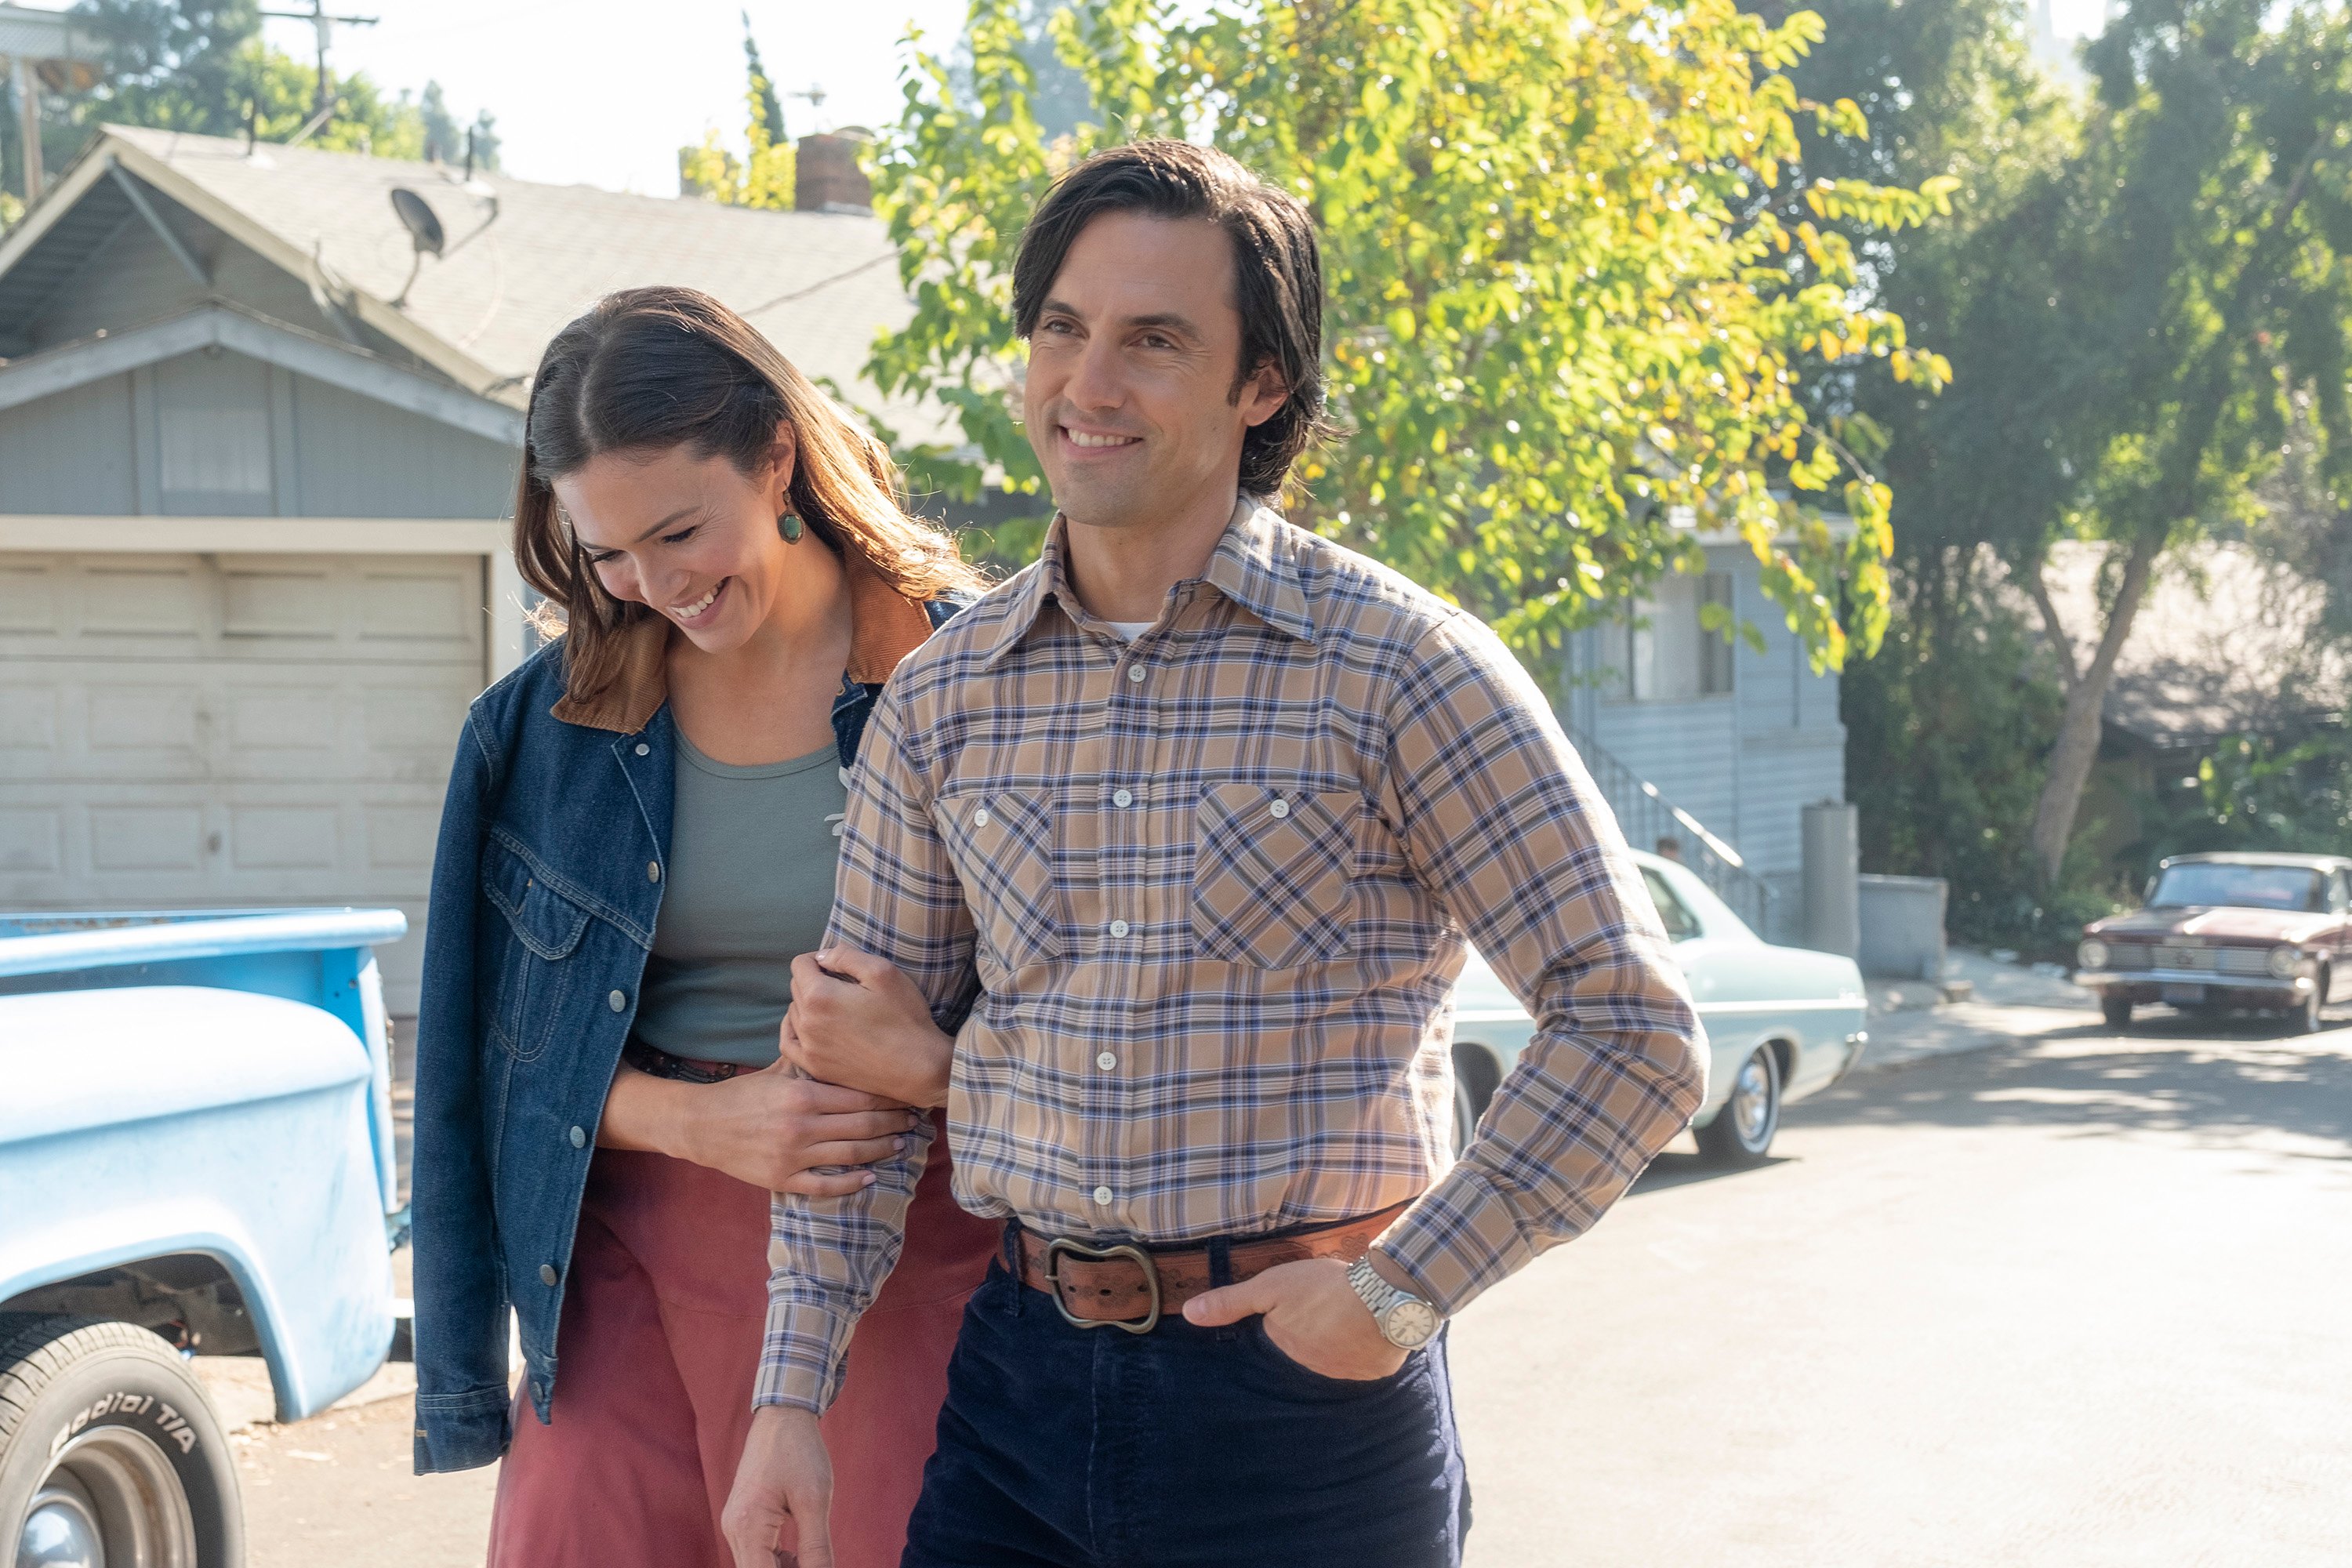 'This Is Us' Season 6 stars Mandy Moore and Milo Ventimiglia, in character as Rebecca and Jack, walk side-by-side, and Rebecca is holding onto Jack's arm. Rebecca is wears red pants, a green shirt, and a jean jacket. Jack is wearing a blue and tan long-sleeved plaid shirt and jeans.